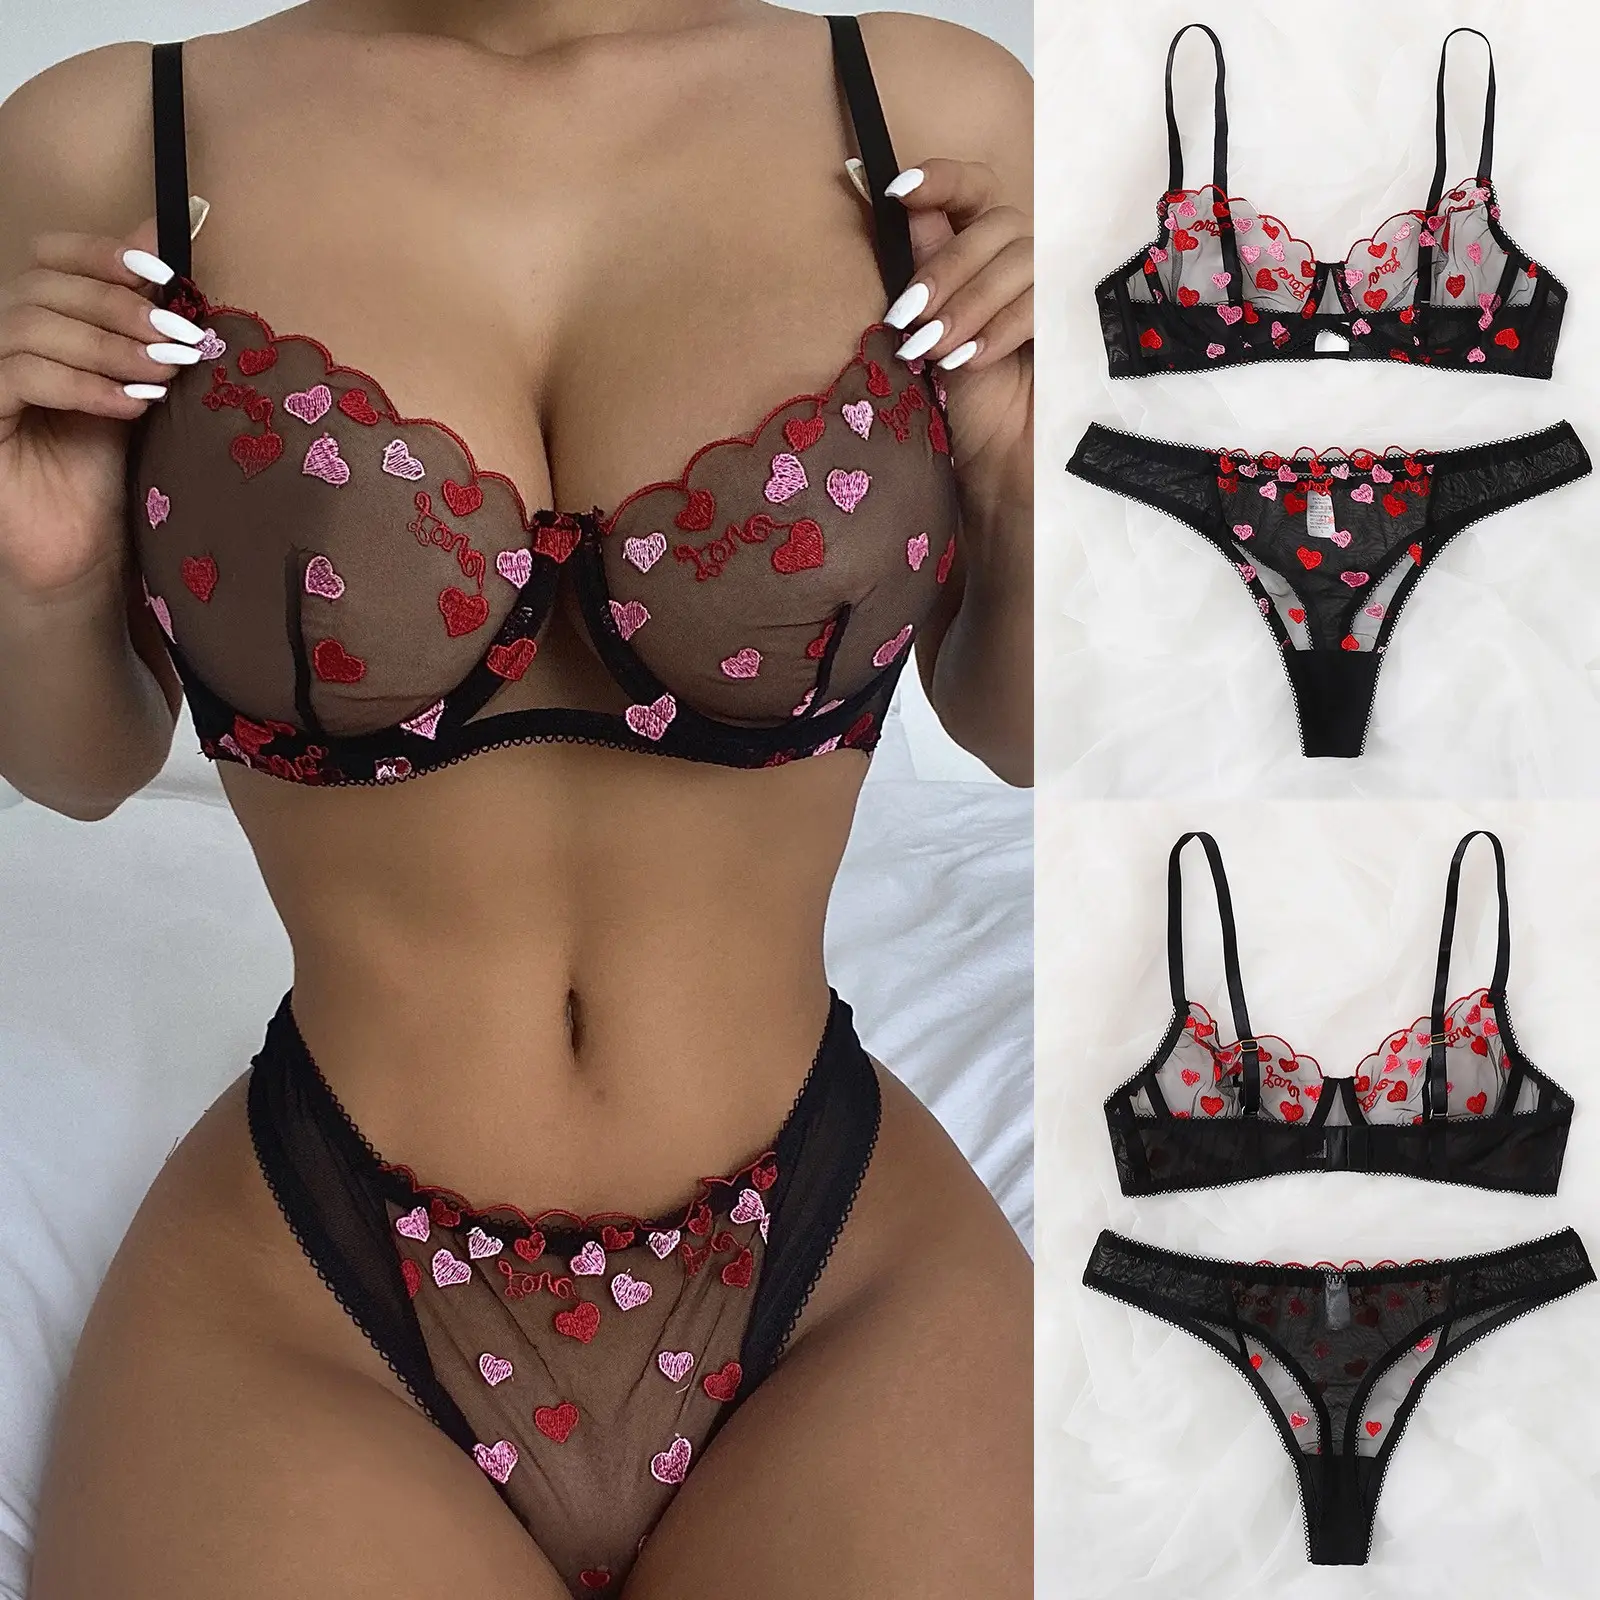 Finetoo Women Sexy Lingerie Heart-shaped Embroidery Bra & Brief Sets Sexy Women Underwear Transparent Erotic Lingerie